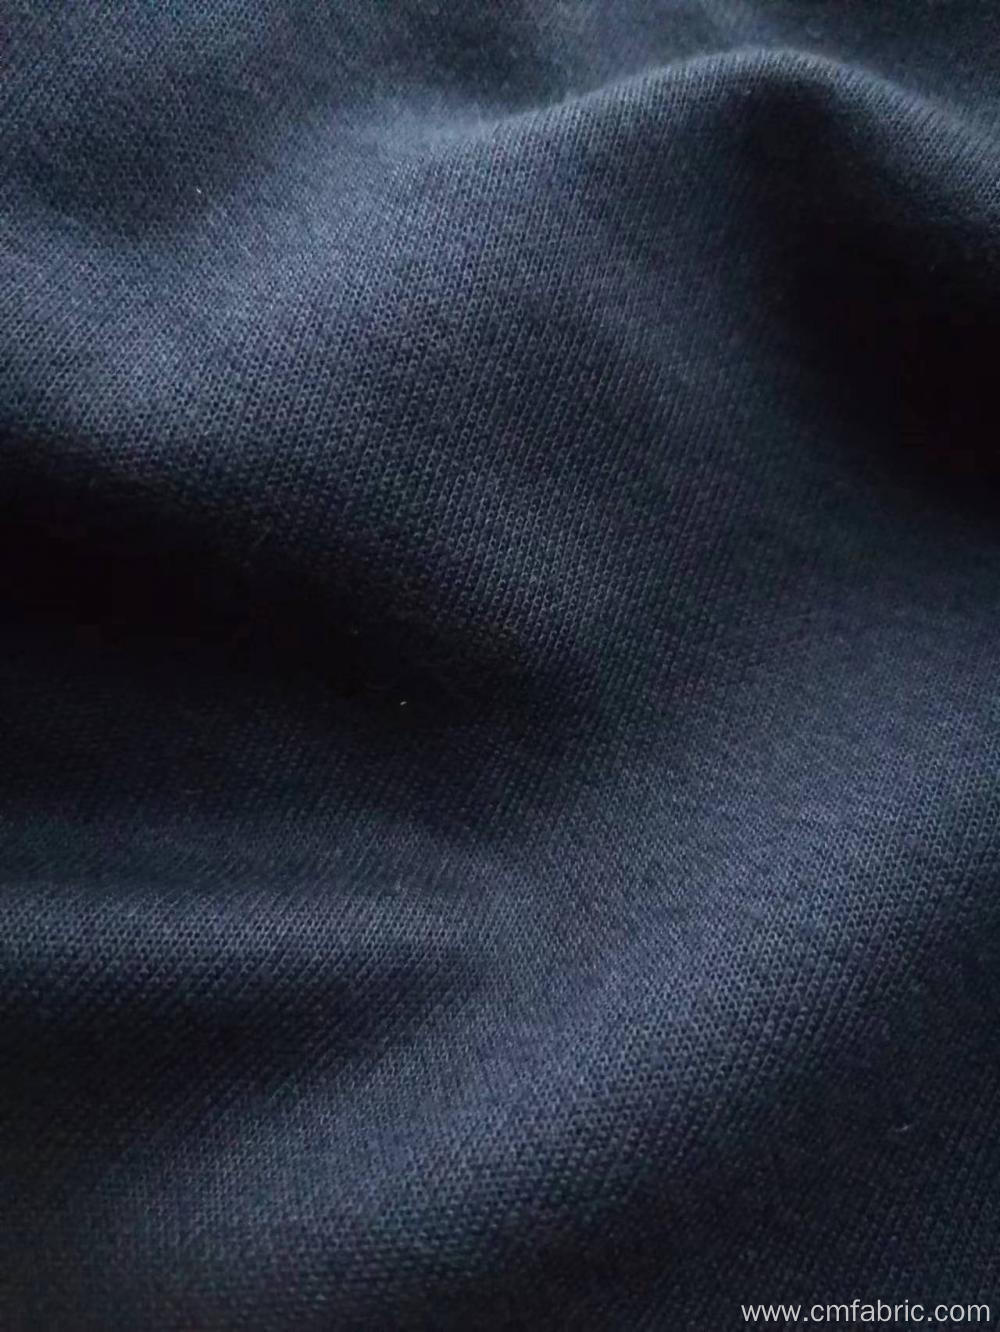 KNITTED Polyester Rayon Ponti roma Black 245gsm